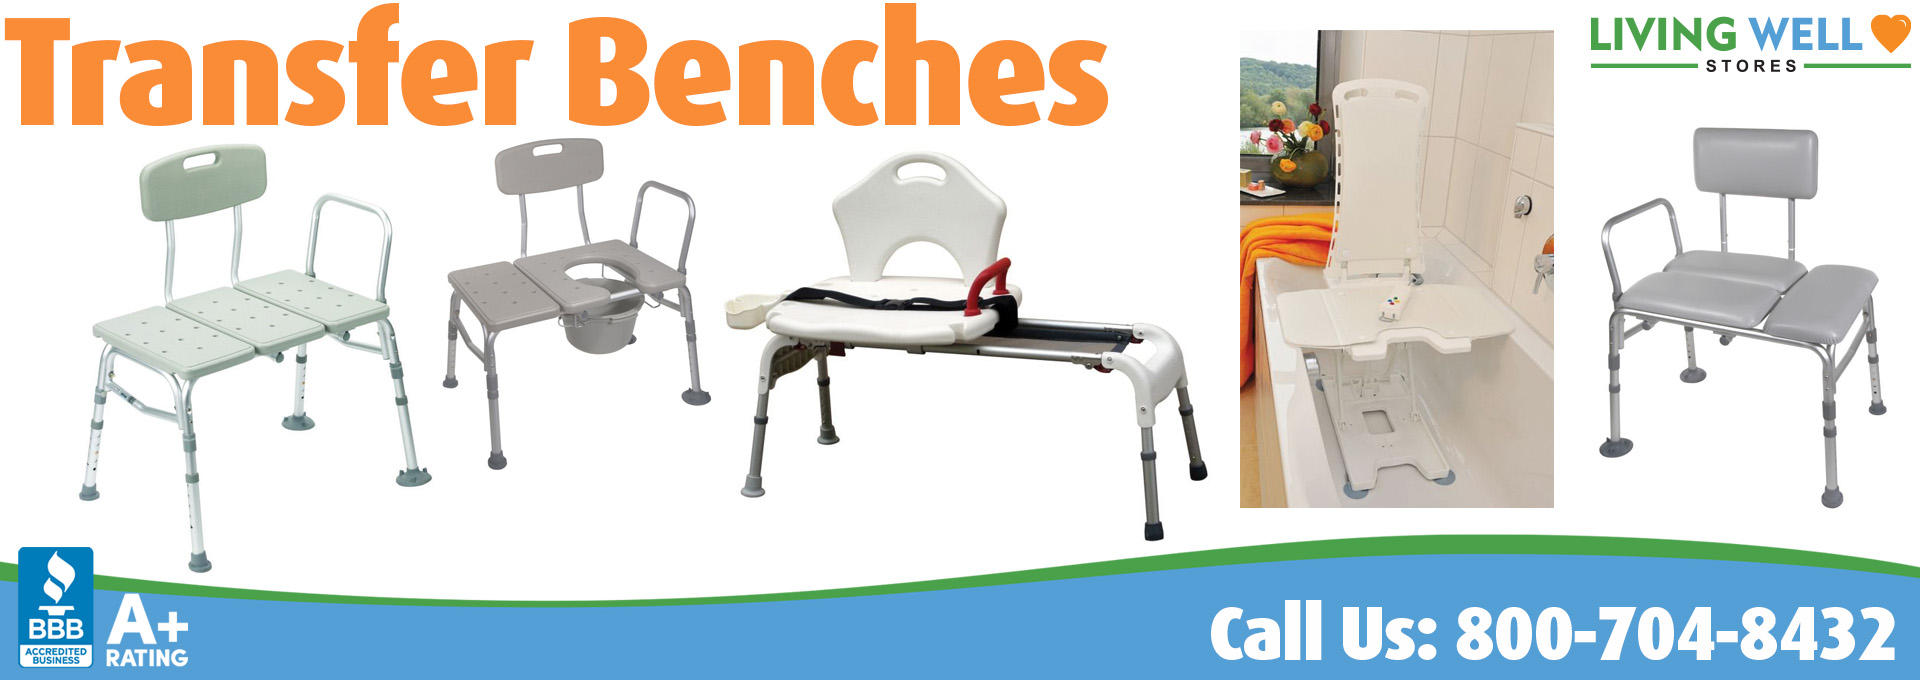 Living Well Stores: Transfer Benches